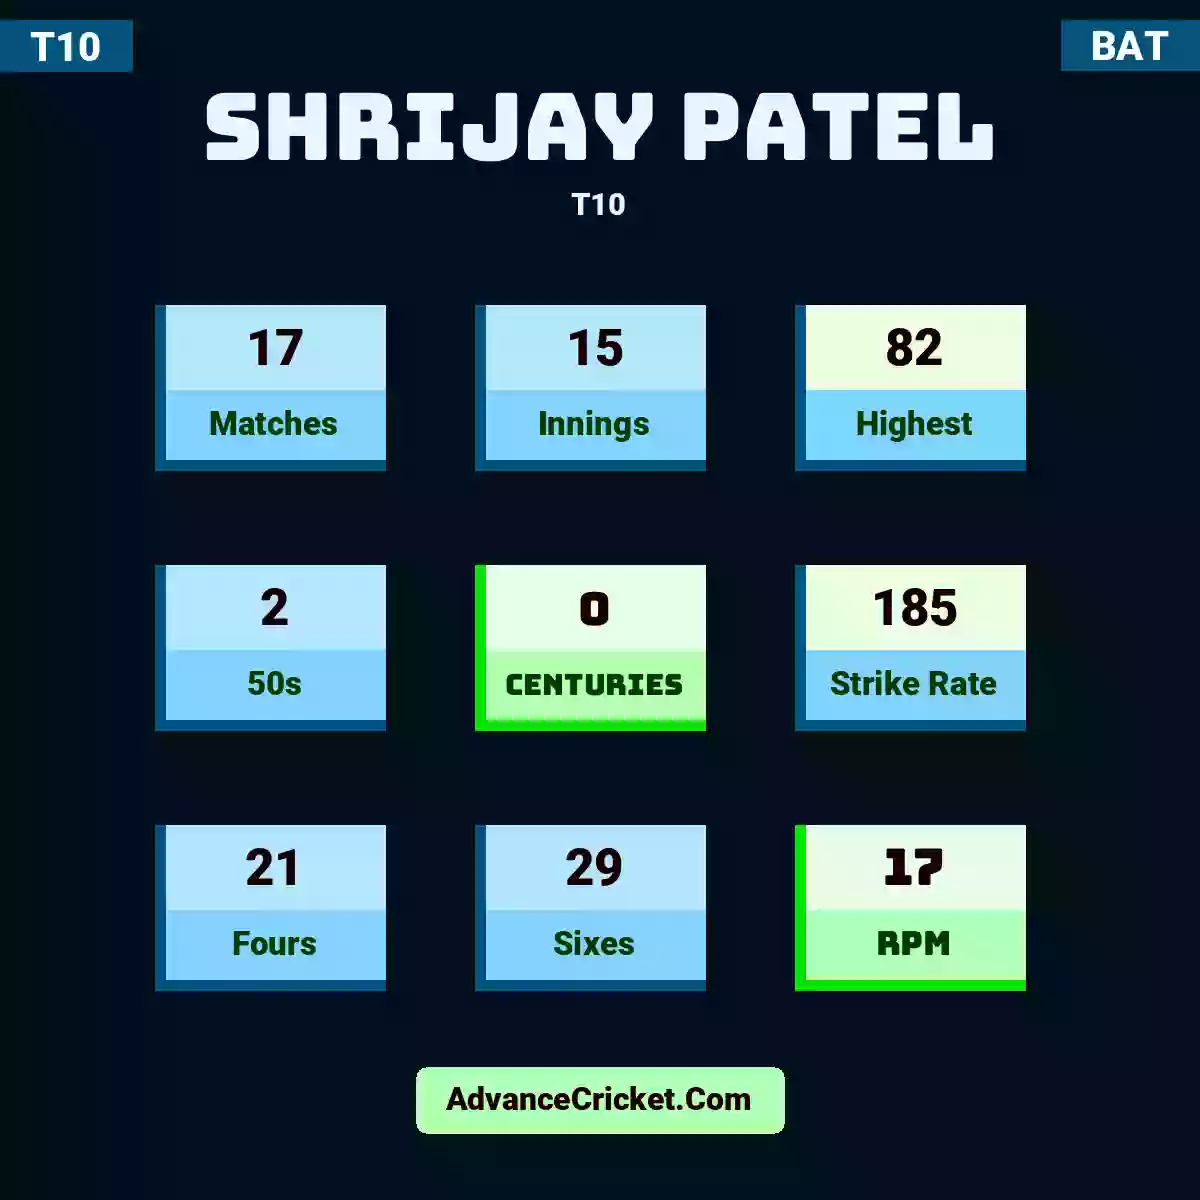 Shrijay Patel T10 , Shrijay Patel played 17 matches, scored 82 runs as highest, 2 half-centuries, and 0 centuries, with a strike rate of 185. S.Patel hit 21 fours and 29 sixes, with an RPM of 17.